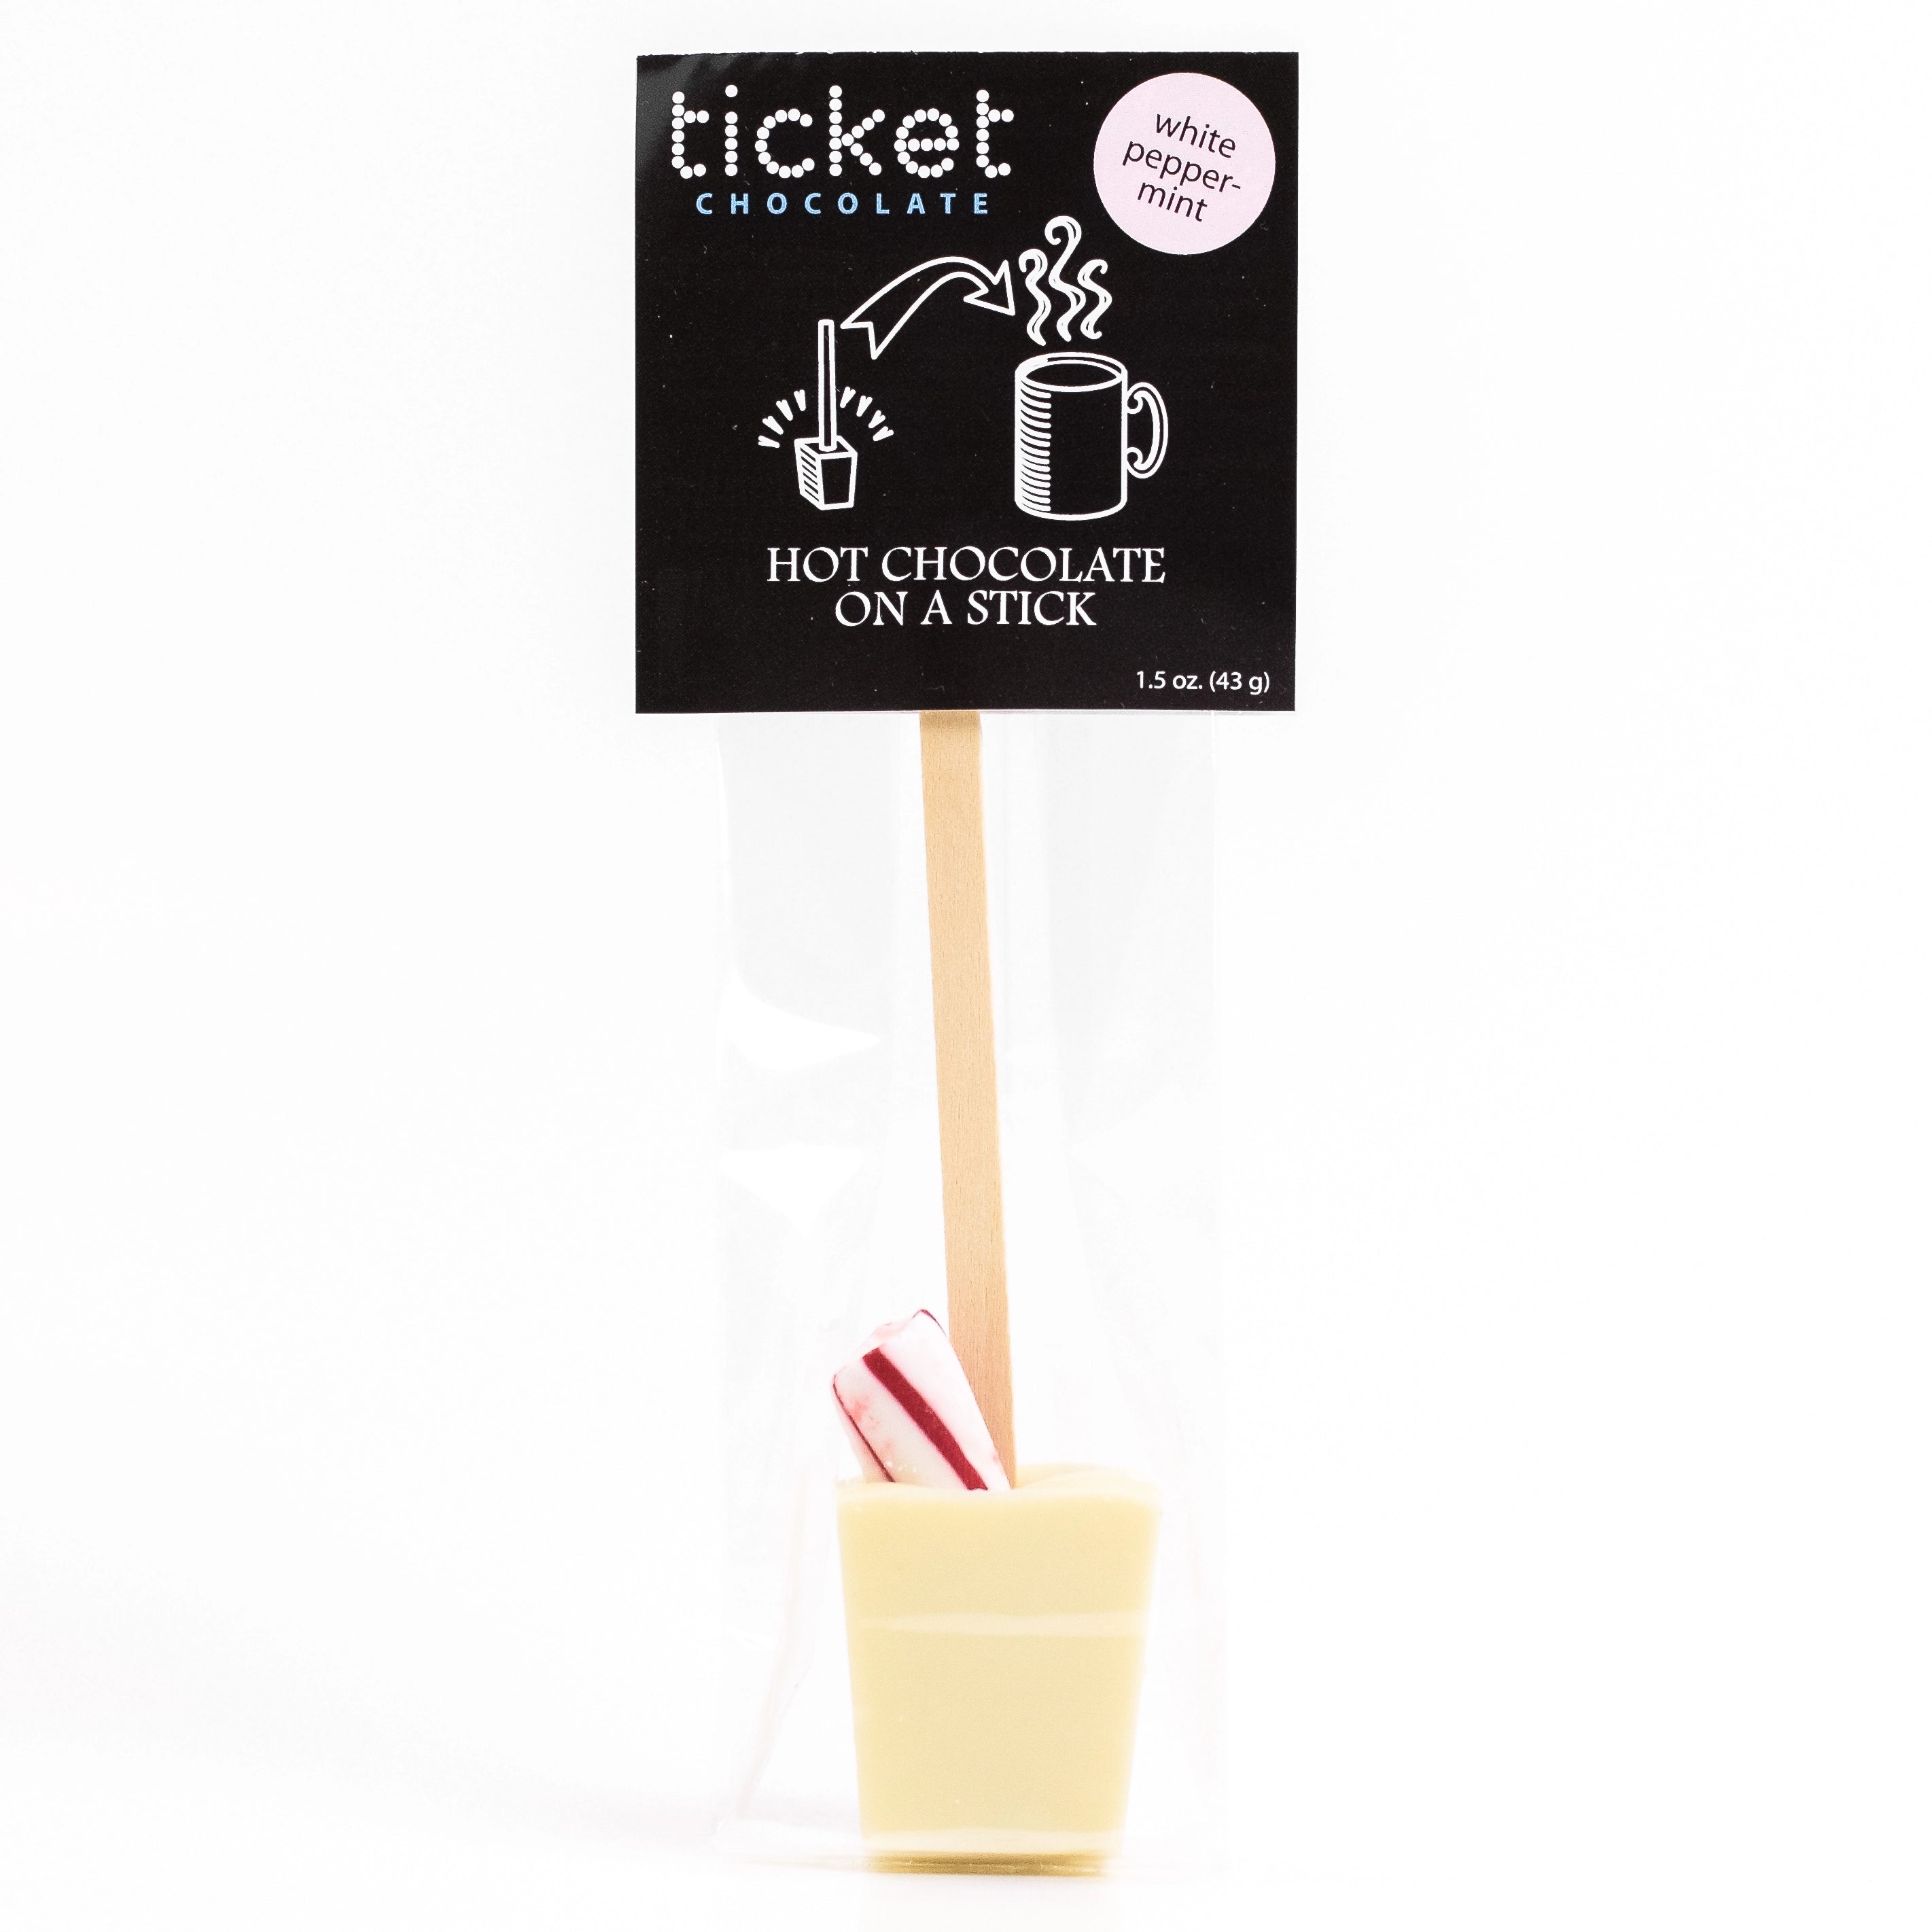 Ticket Chocolate - White Peppermint - Hot Chocolate on a Stick - Single